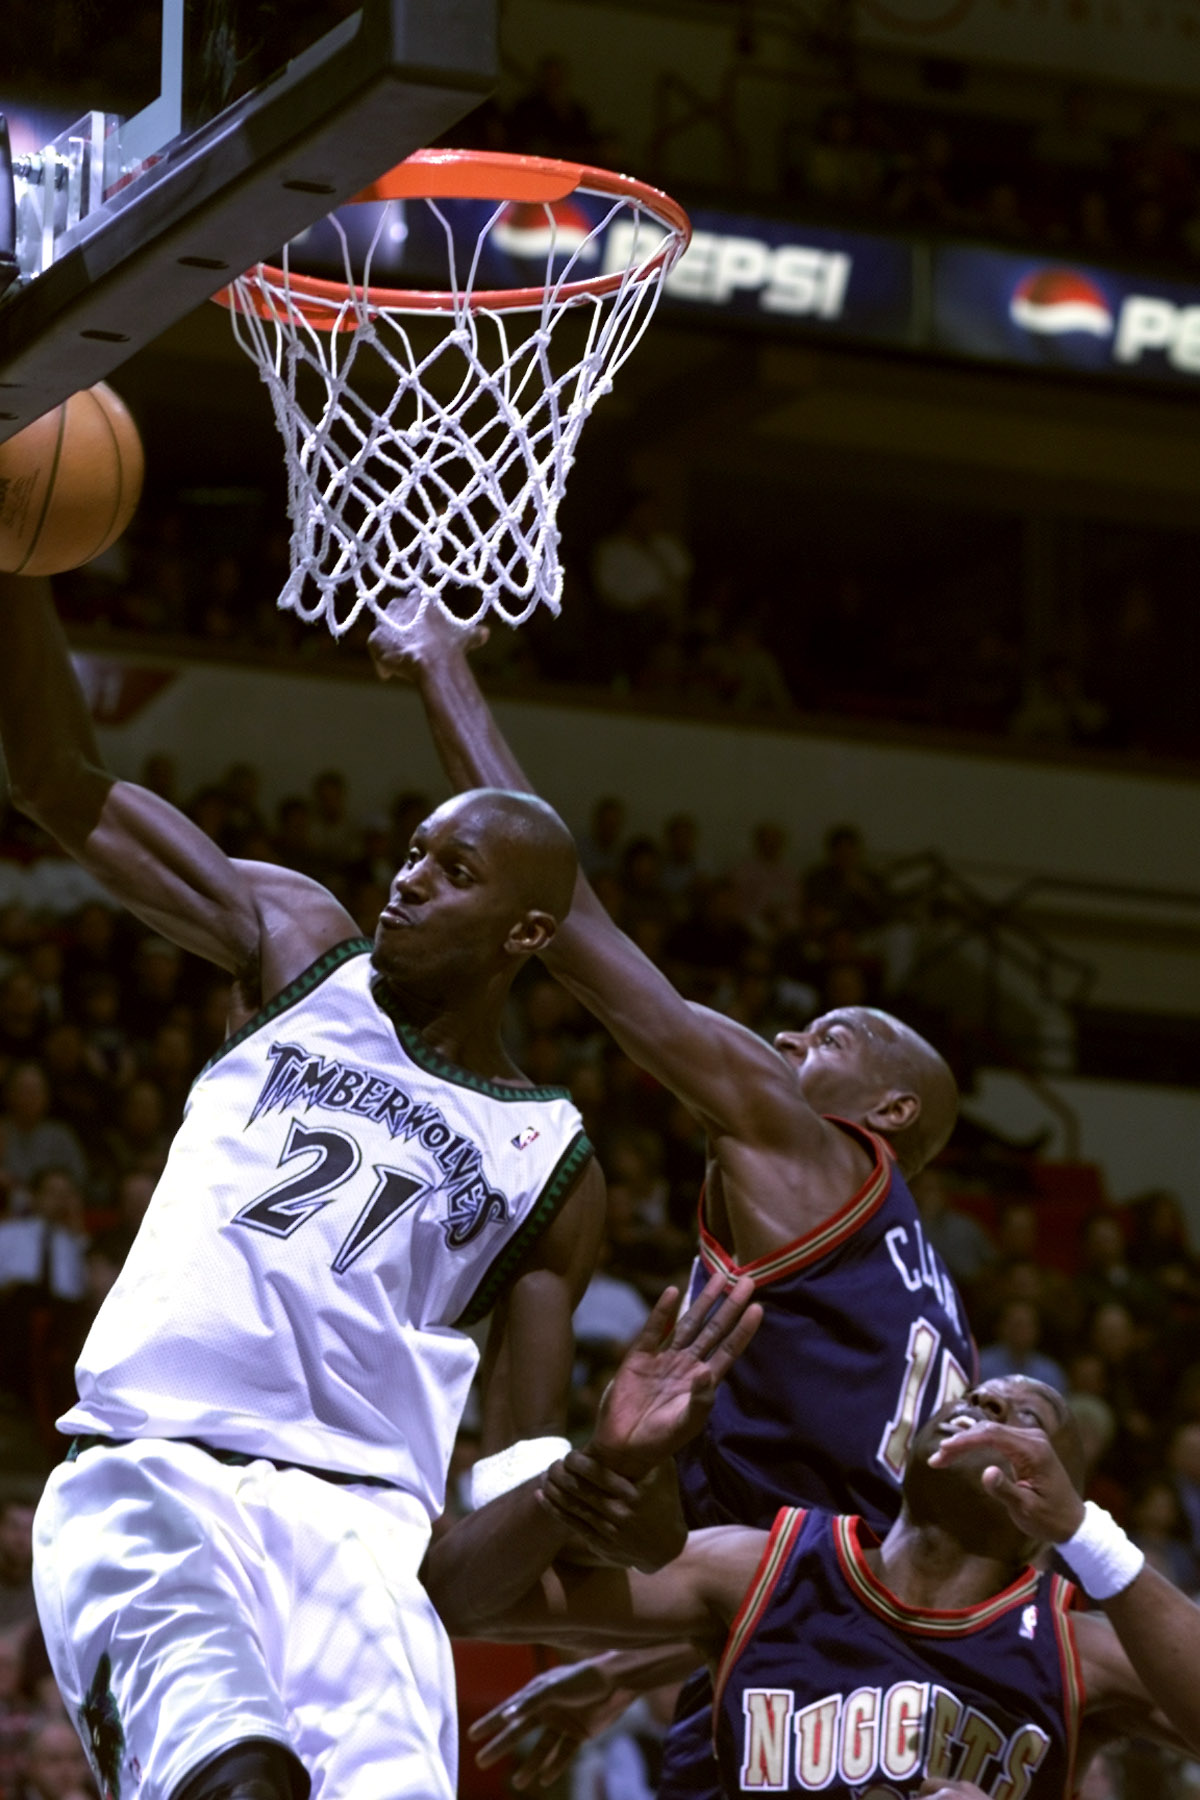 Minneapolis Mn, Timberwolves vs Denver Nuggets. — Timberwolves Kevin Garnett pulls down a defensive reboound over Denver’s Keon Clark during 2nd period NBA action at the Target Center.